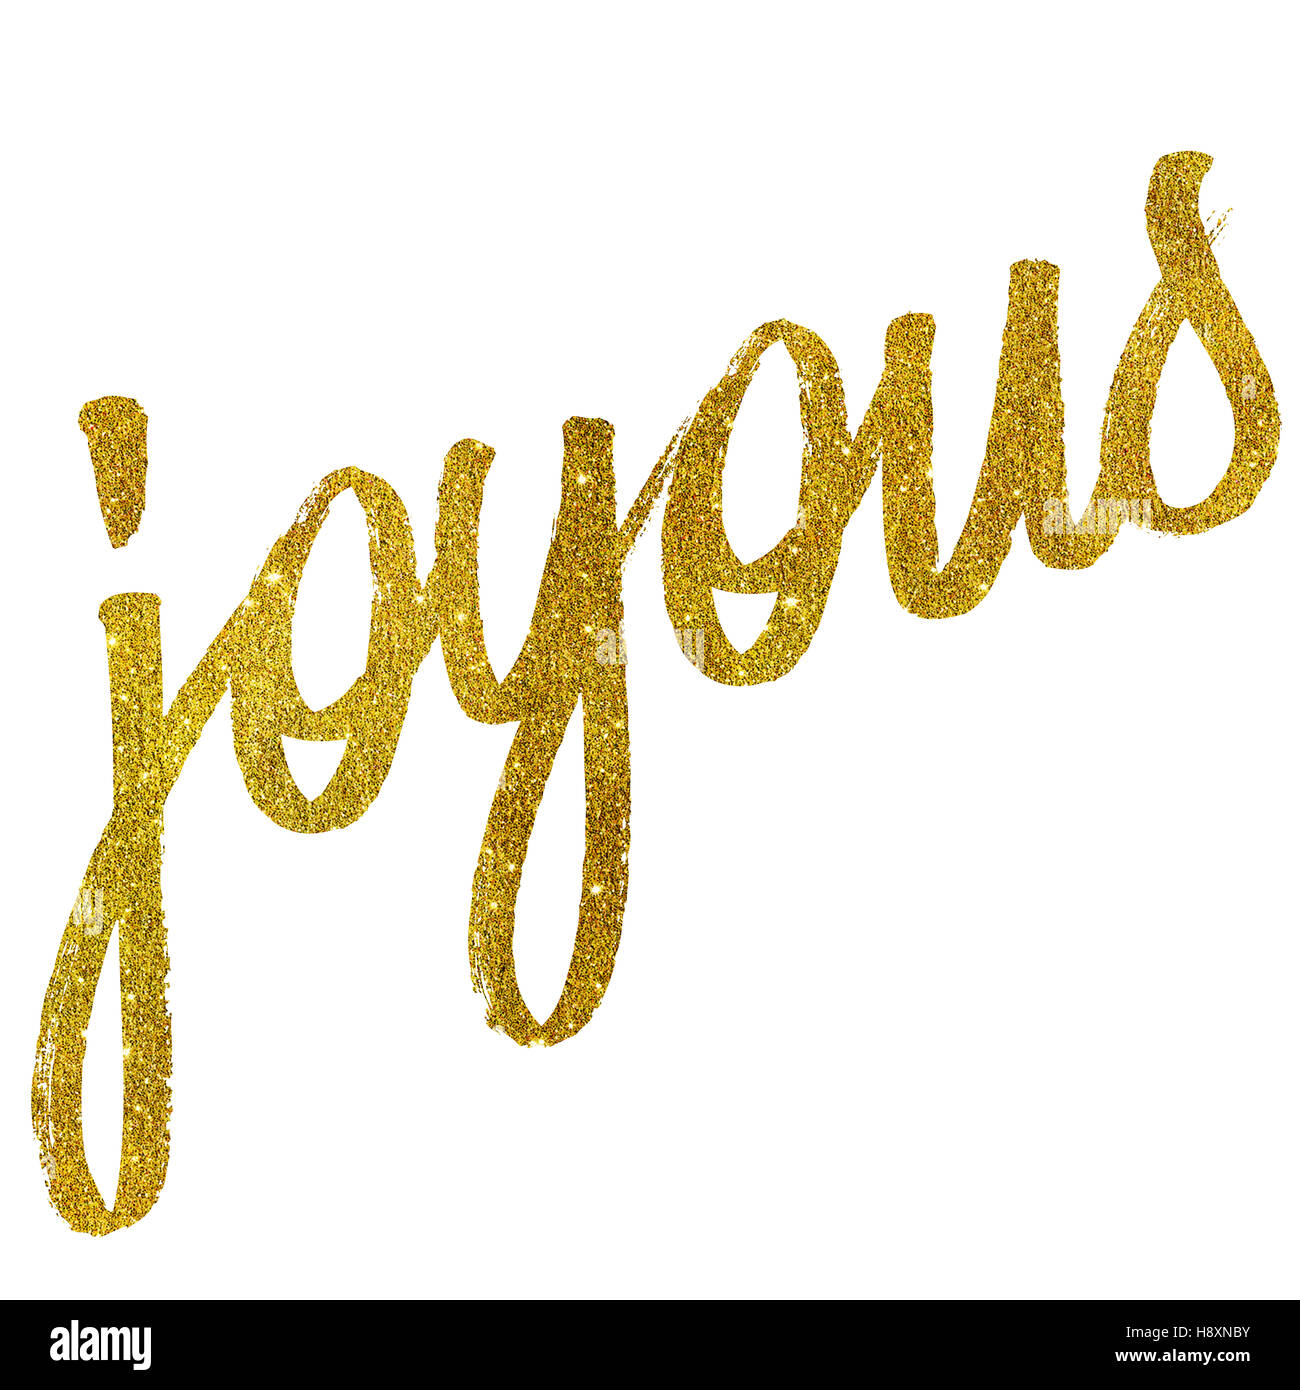 Joyous Gold Faux Foil Metallic Glitter Quote Isolated Stock Photo